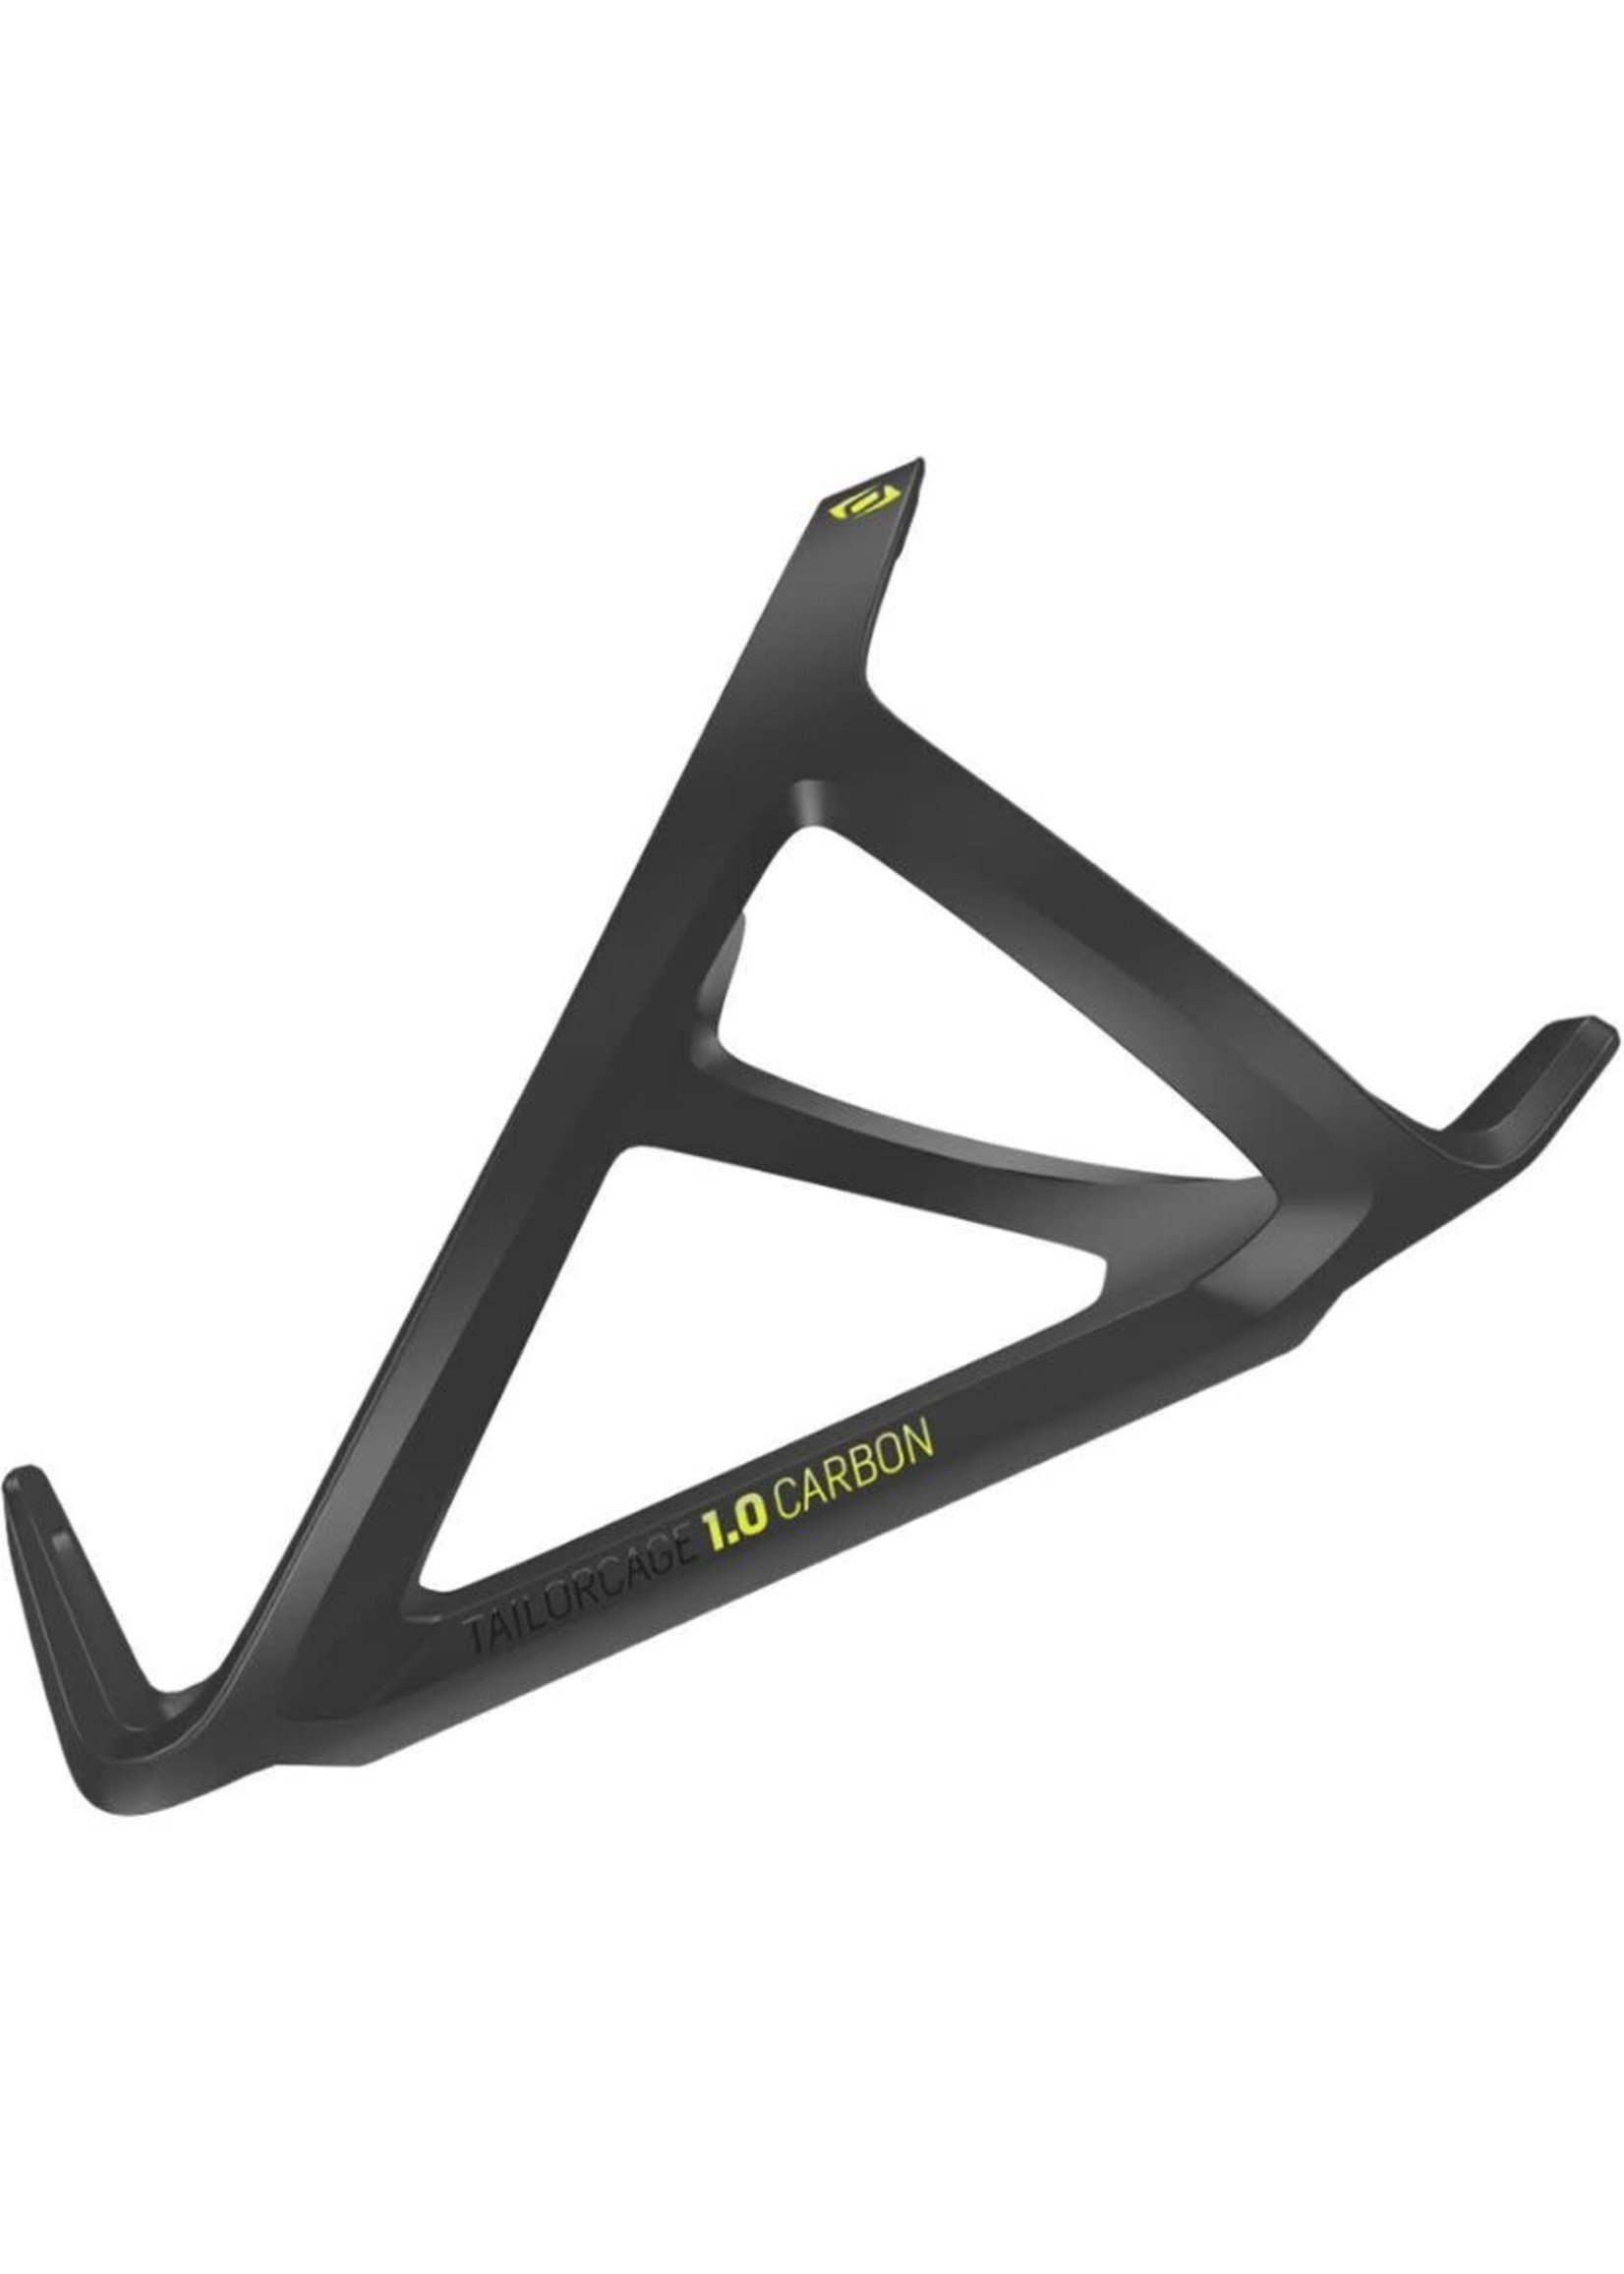 Syncros SYN Bottle Cage Tailor cage 1.0 Right